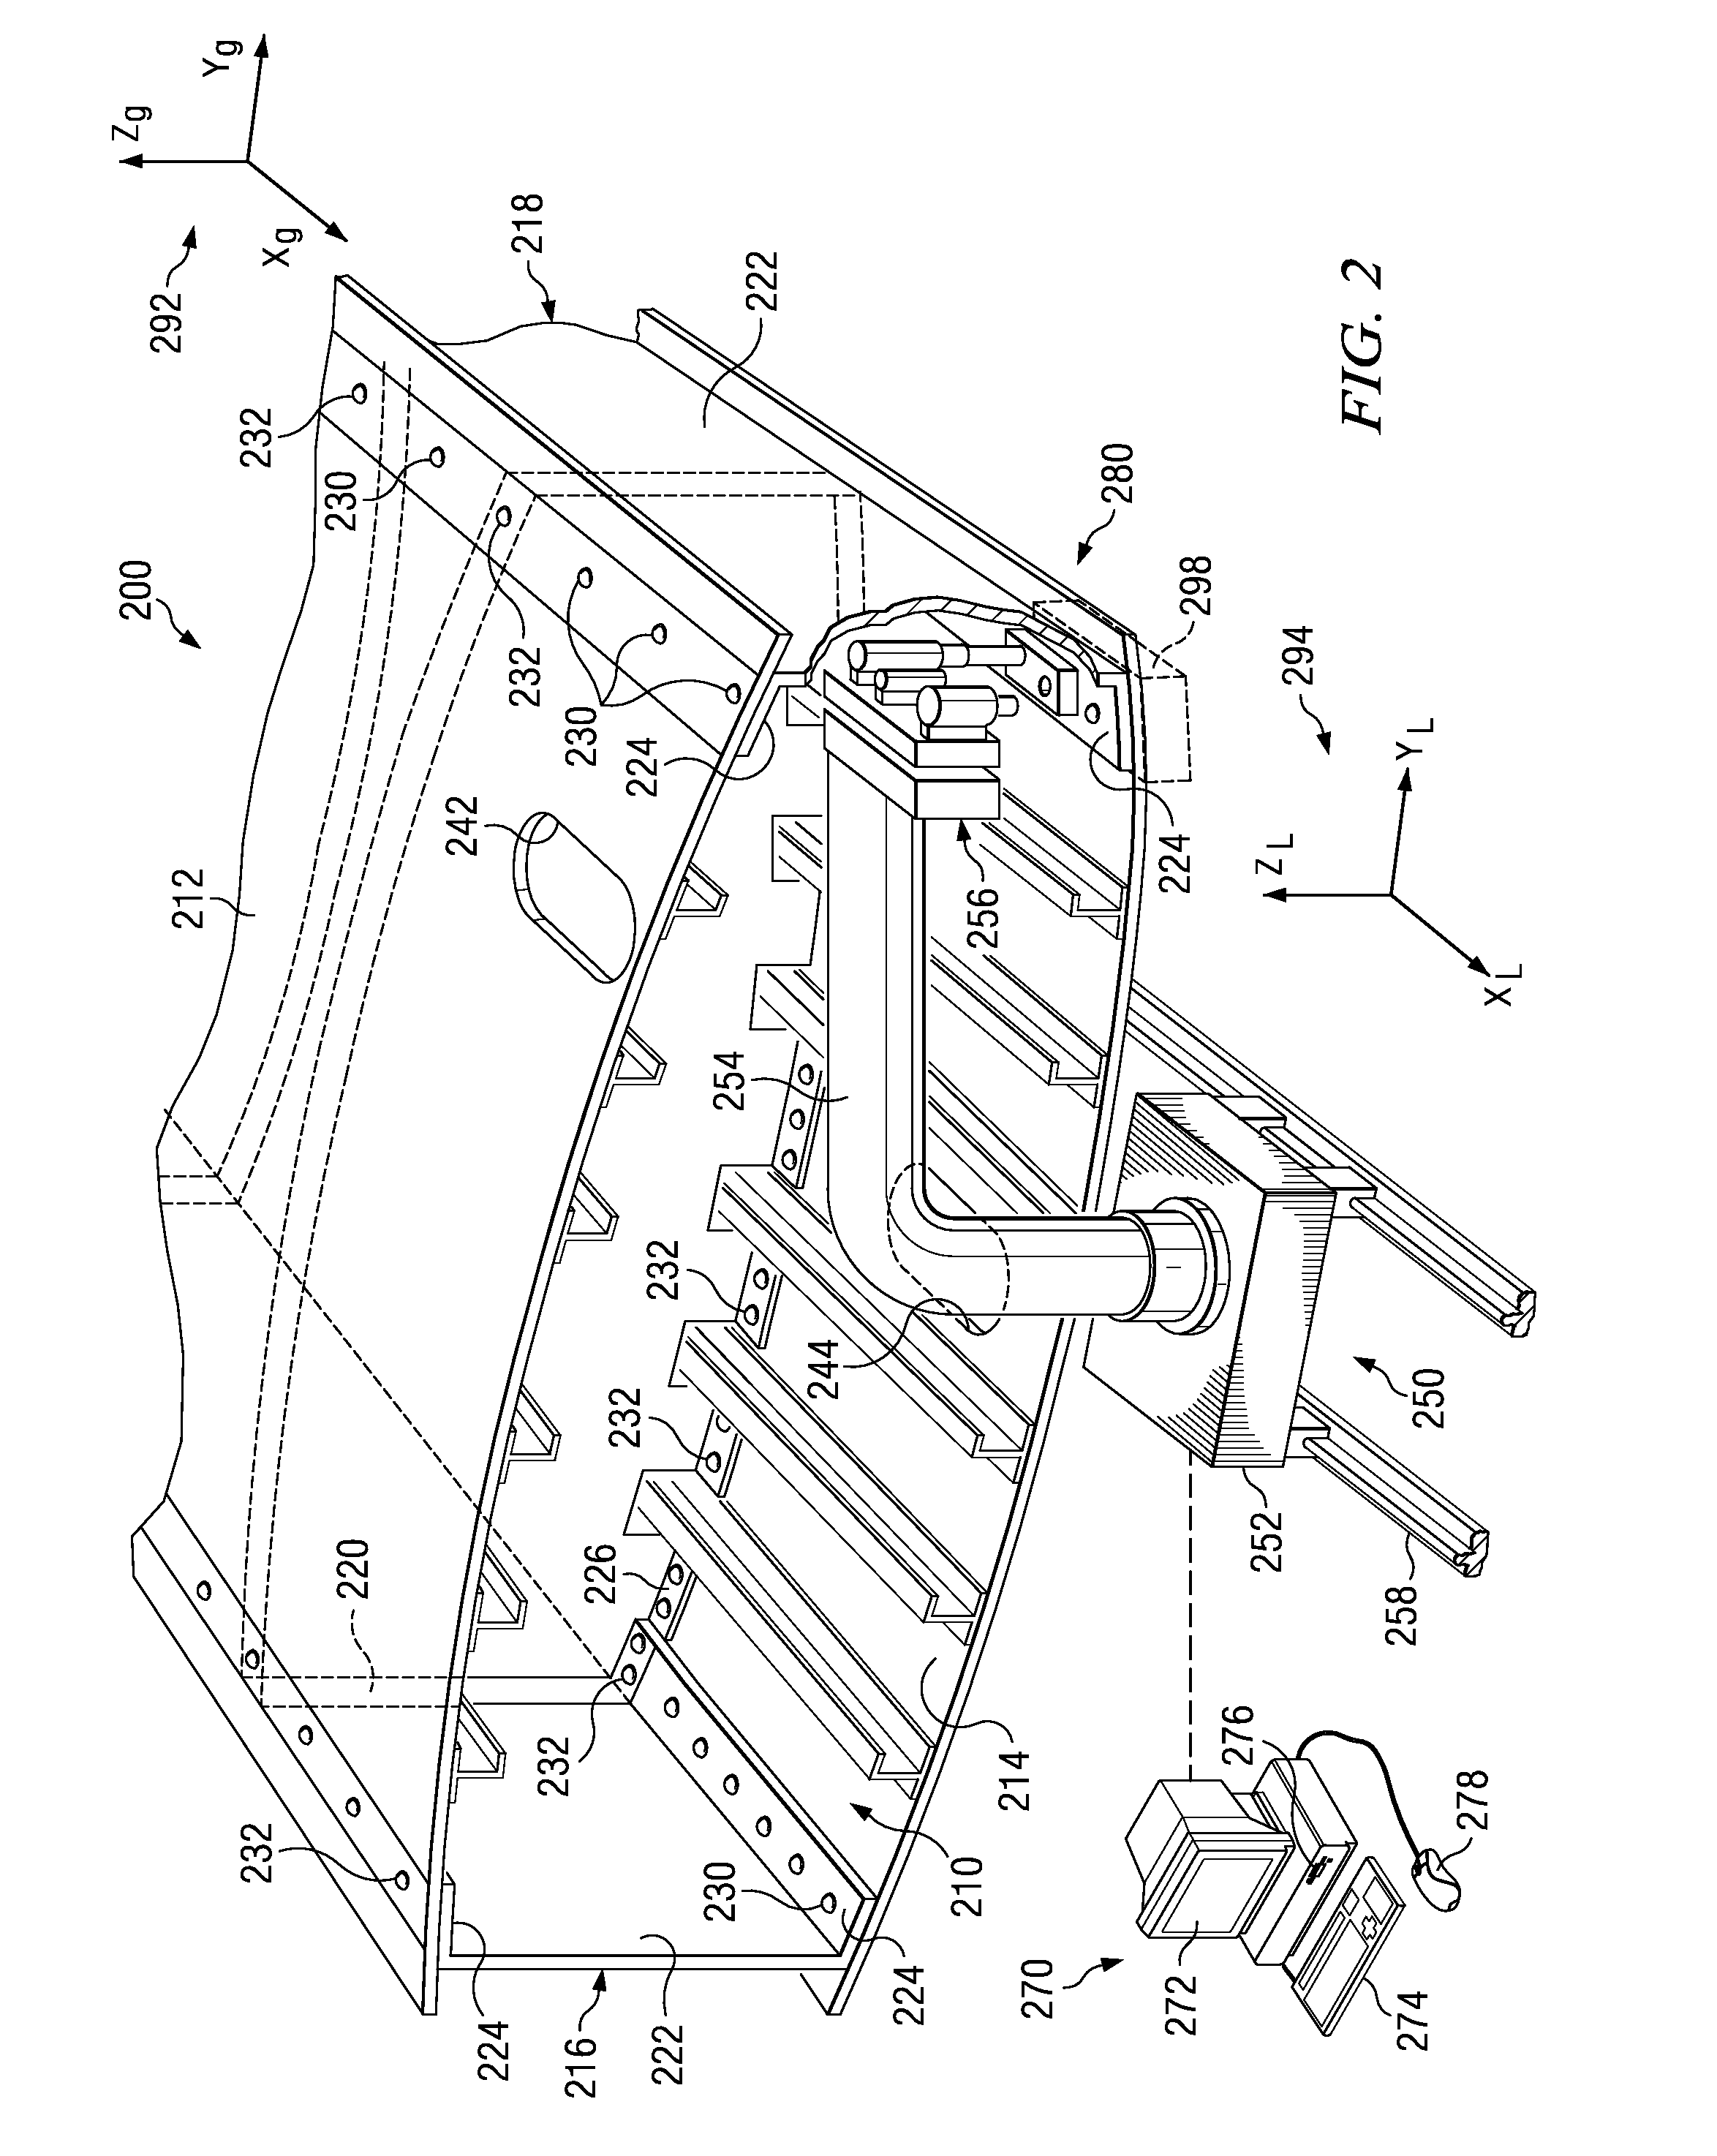 Robot-deployed assembly tool and method for installing fasteners in aircraft structures